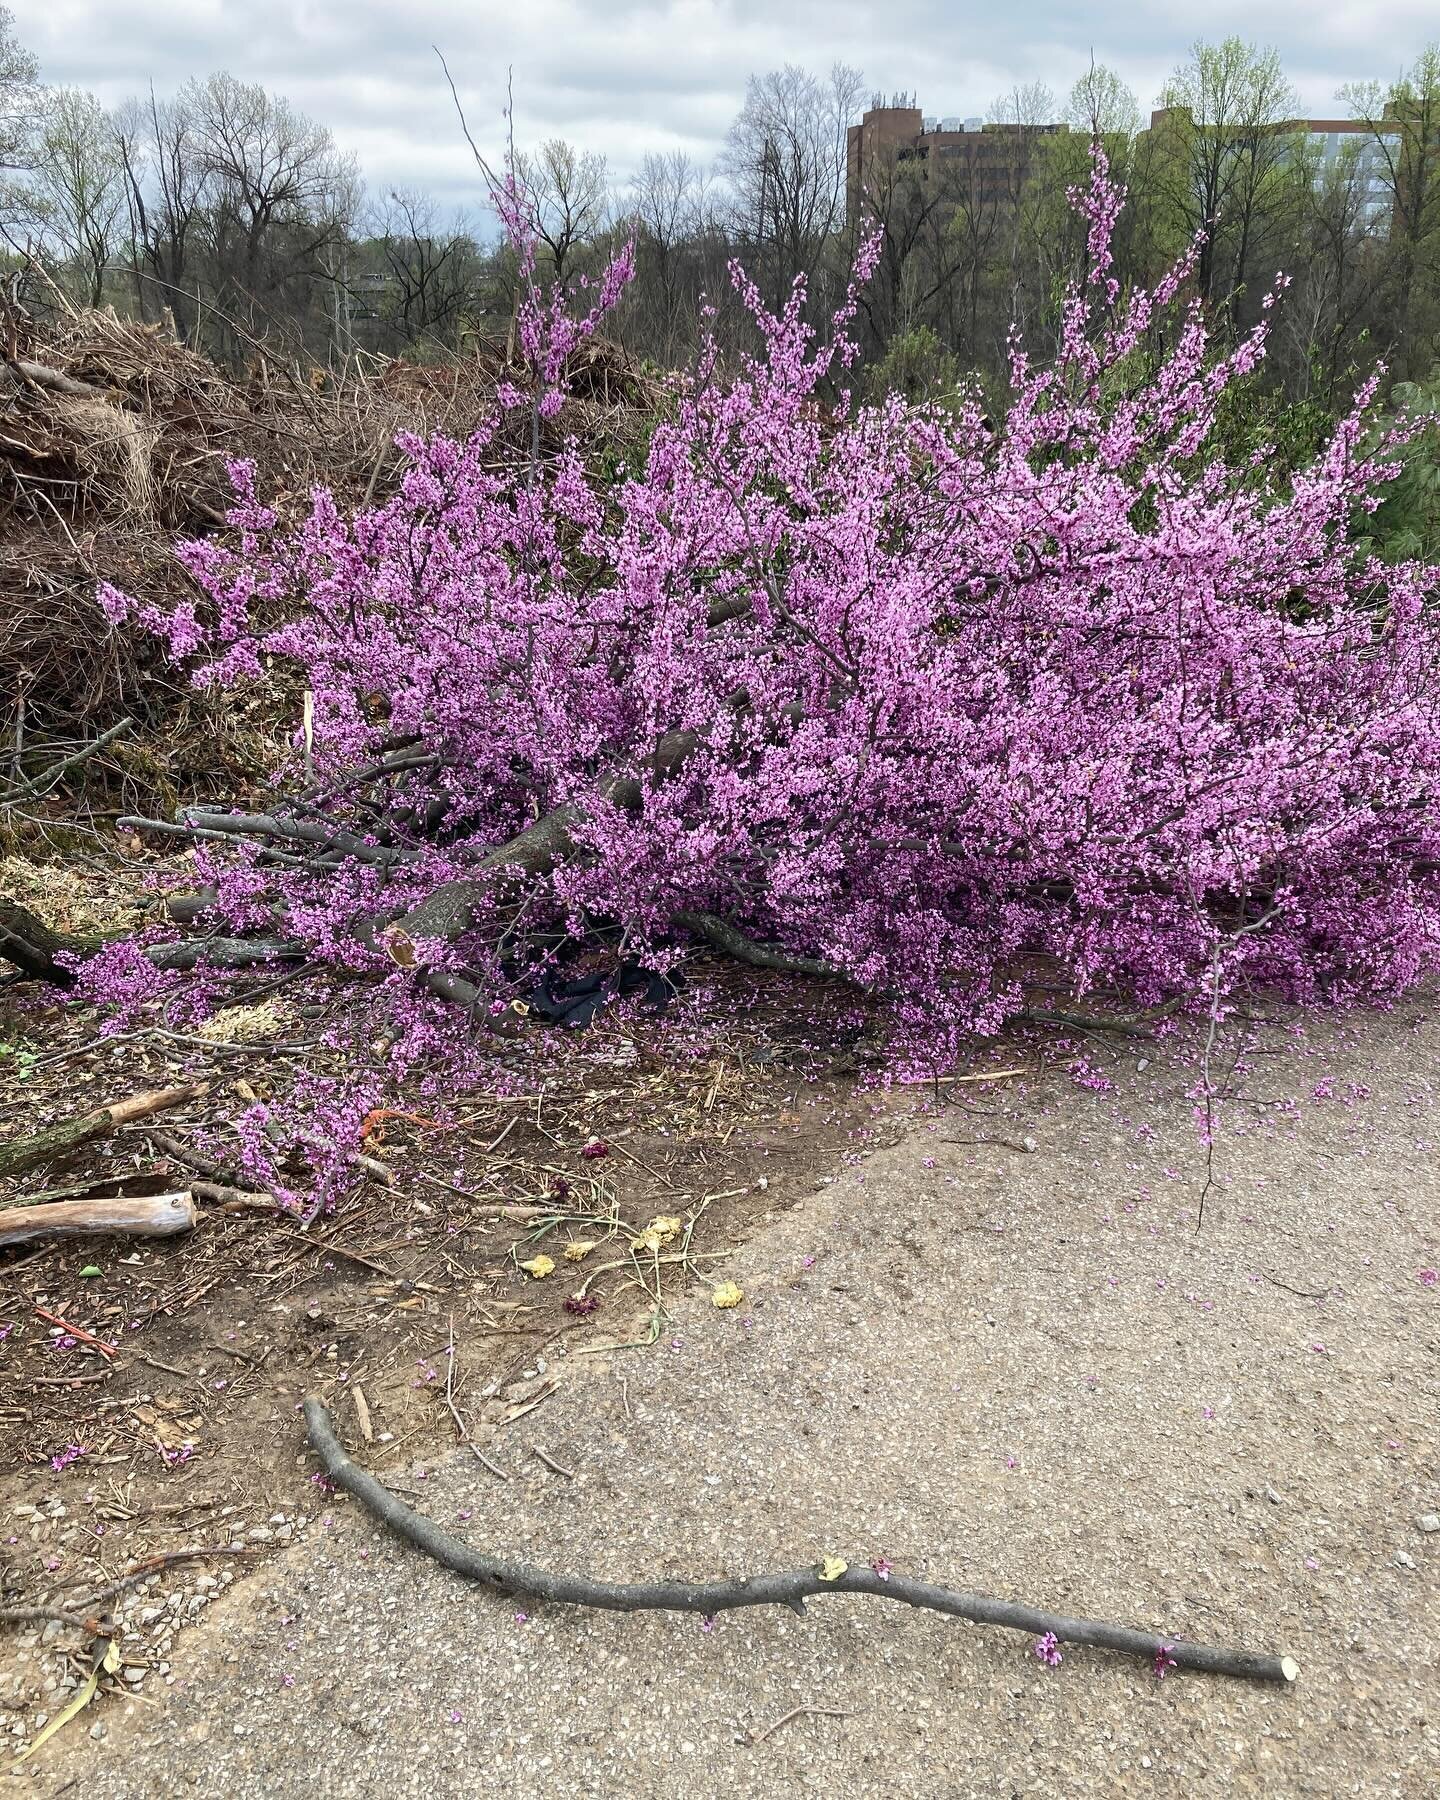 Bonus!! It's tree trimming (and general post winter clean up) time at the neighboring cemetery. How kind of them to leave these lovely redbud branches so close to the edge of the brush pile! 
Gathering some nice fresh bark for weaving.
#artistinky
#f